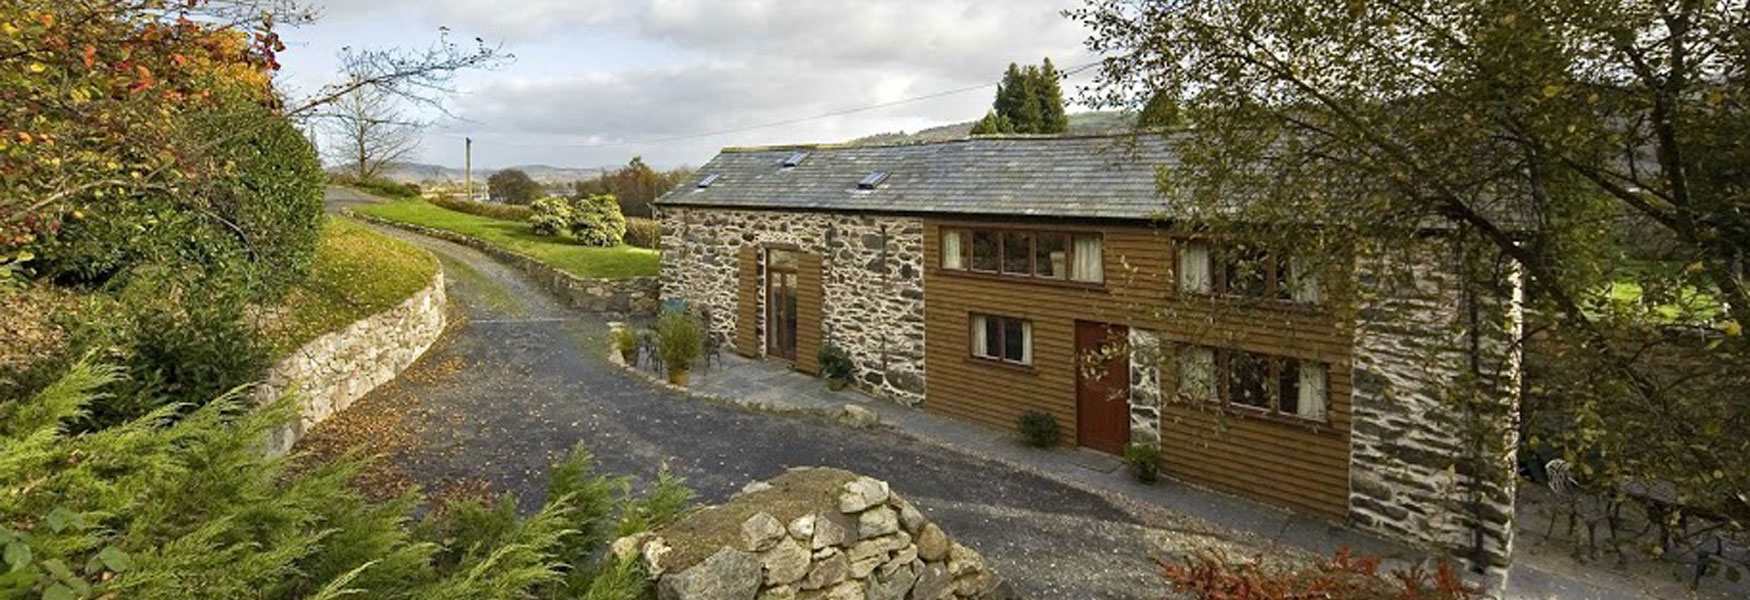 Self Catering Accommodation In North Wales Wales Self Catering